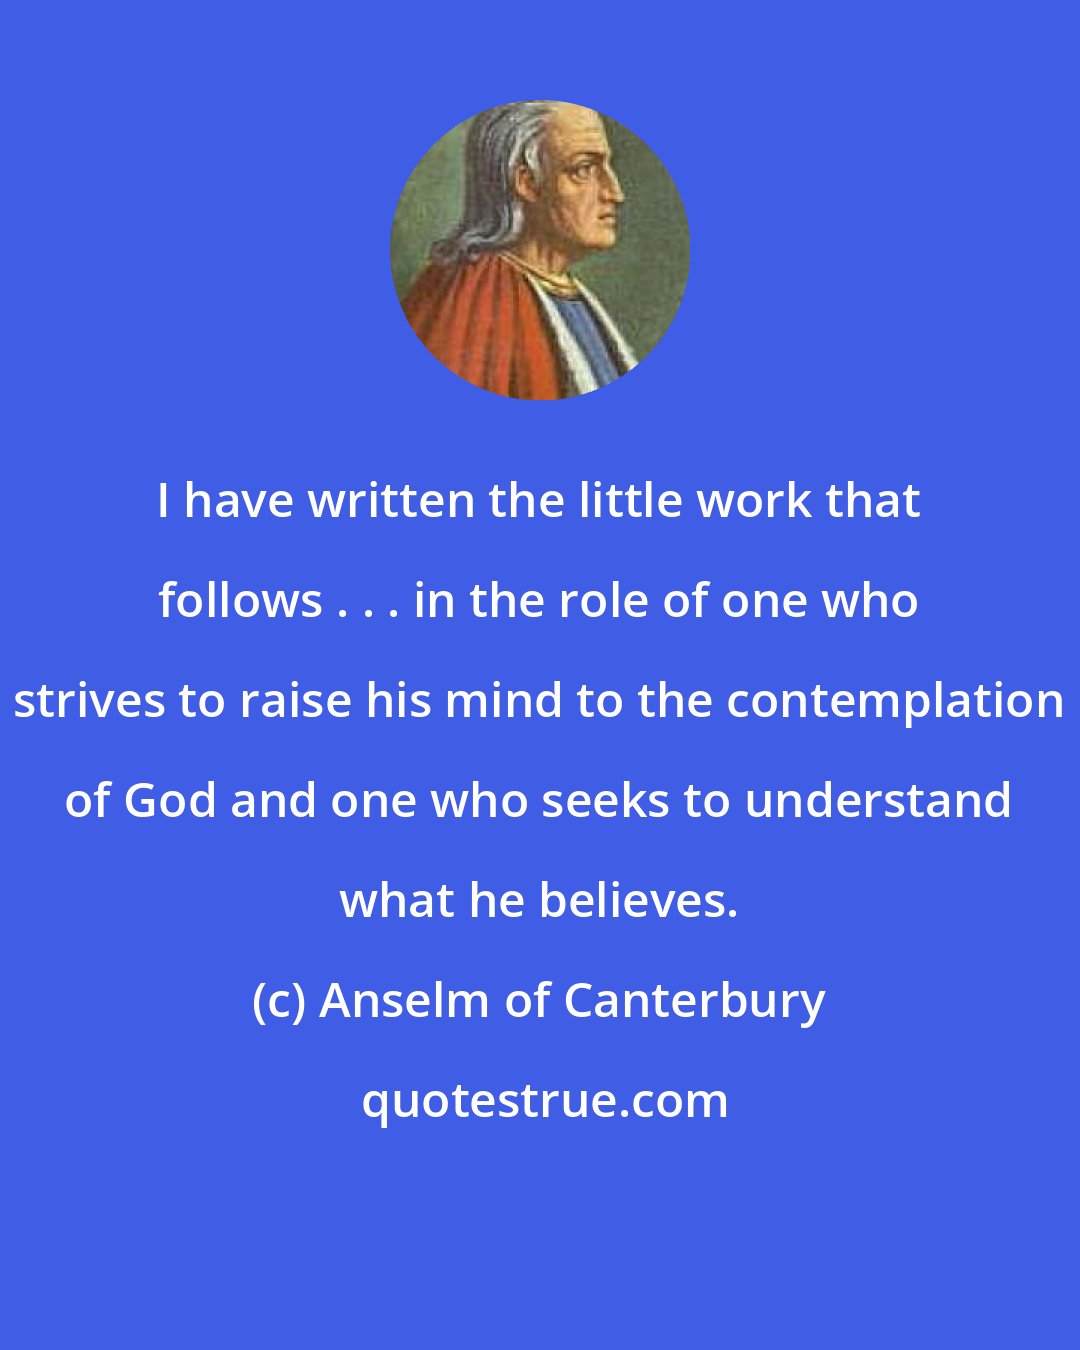 Anselm of Canterbury: I have written the little work that follows . . . in the role of one who strives to raise his mind to the contemplation of God and one who seeks to understand what he believes.